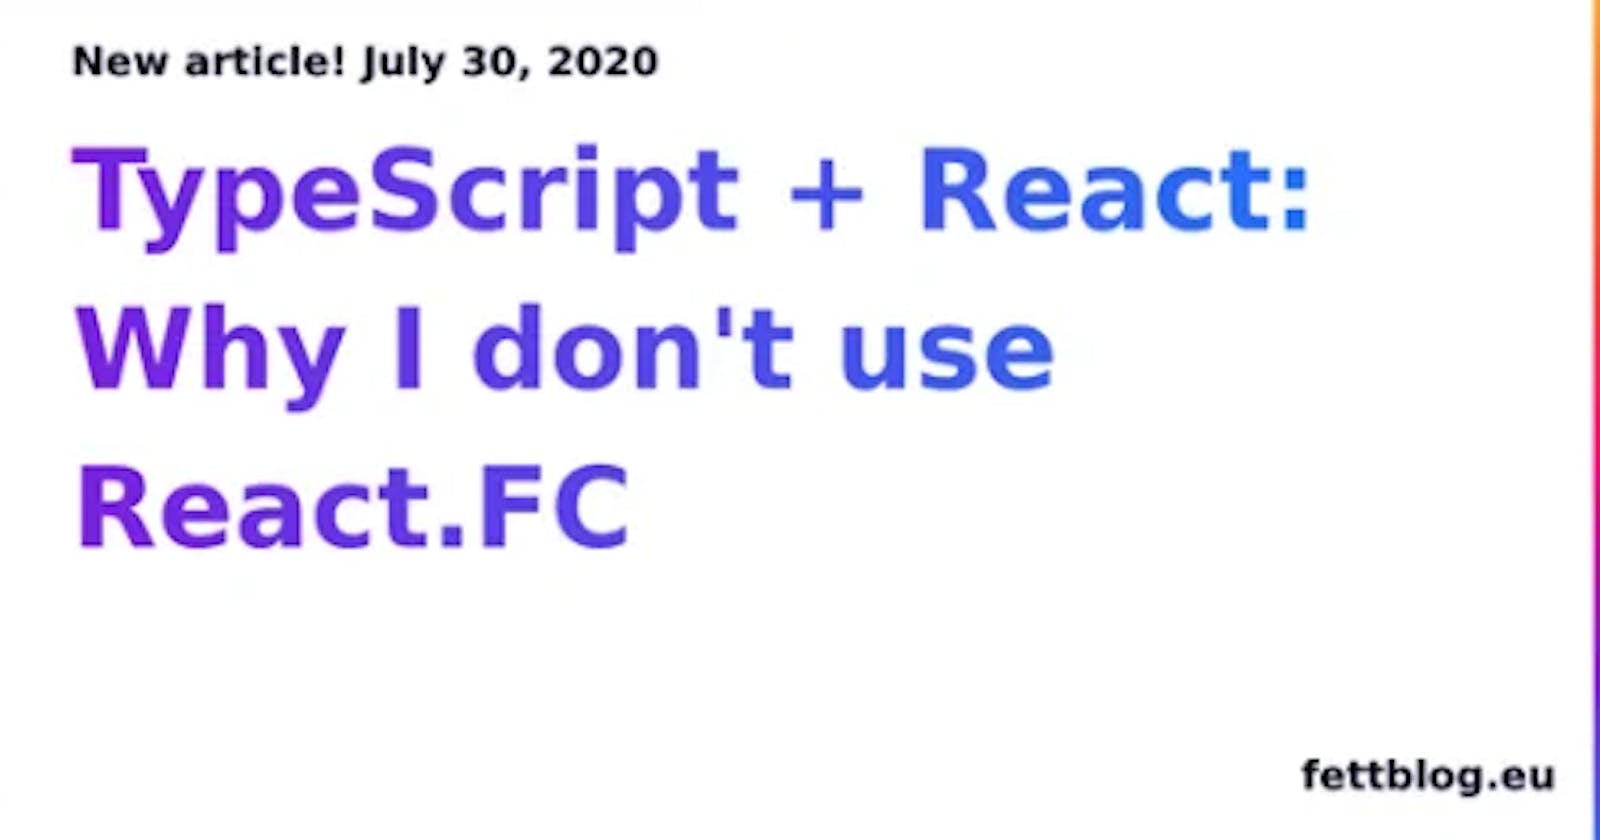 React Fc is discouraged